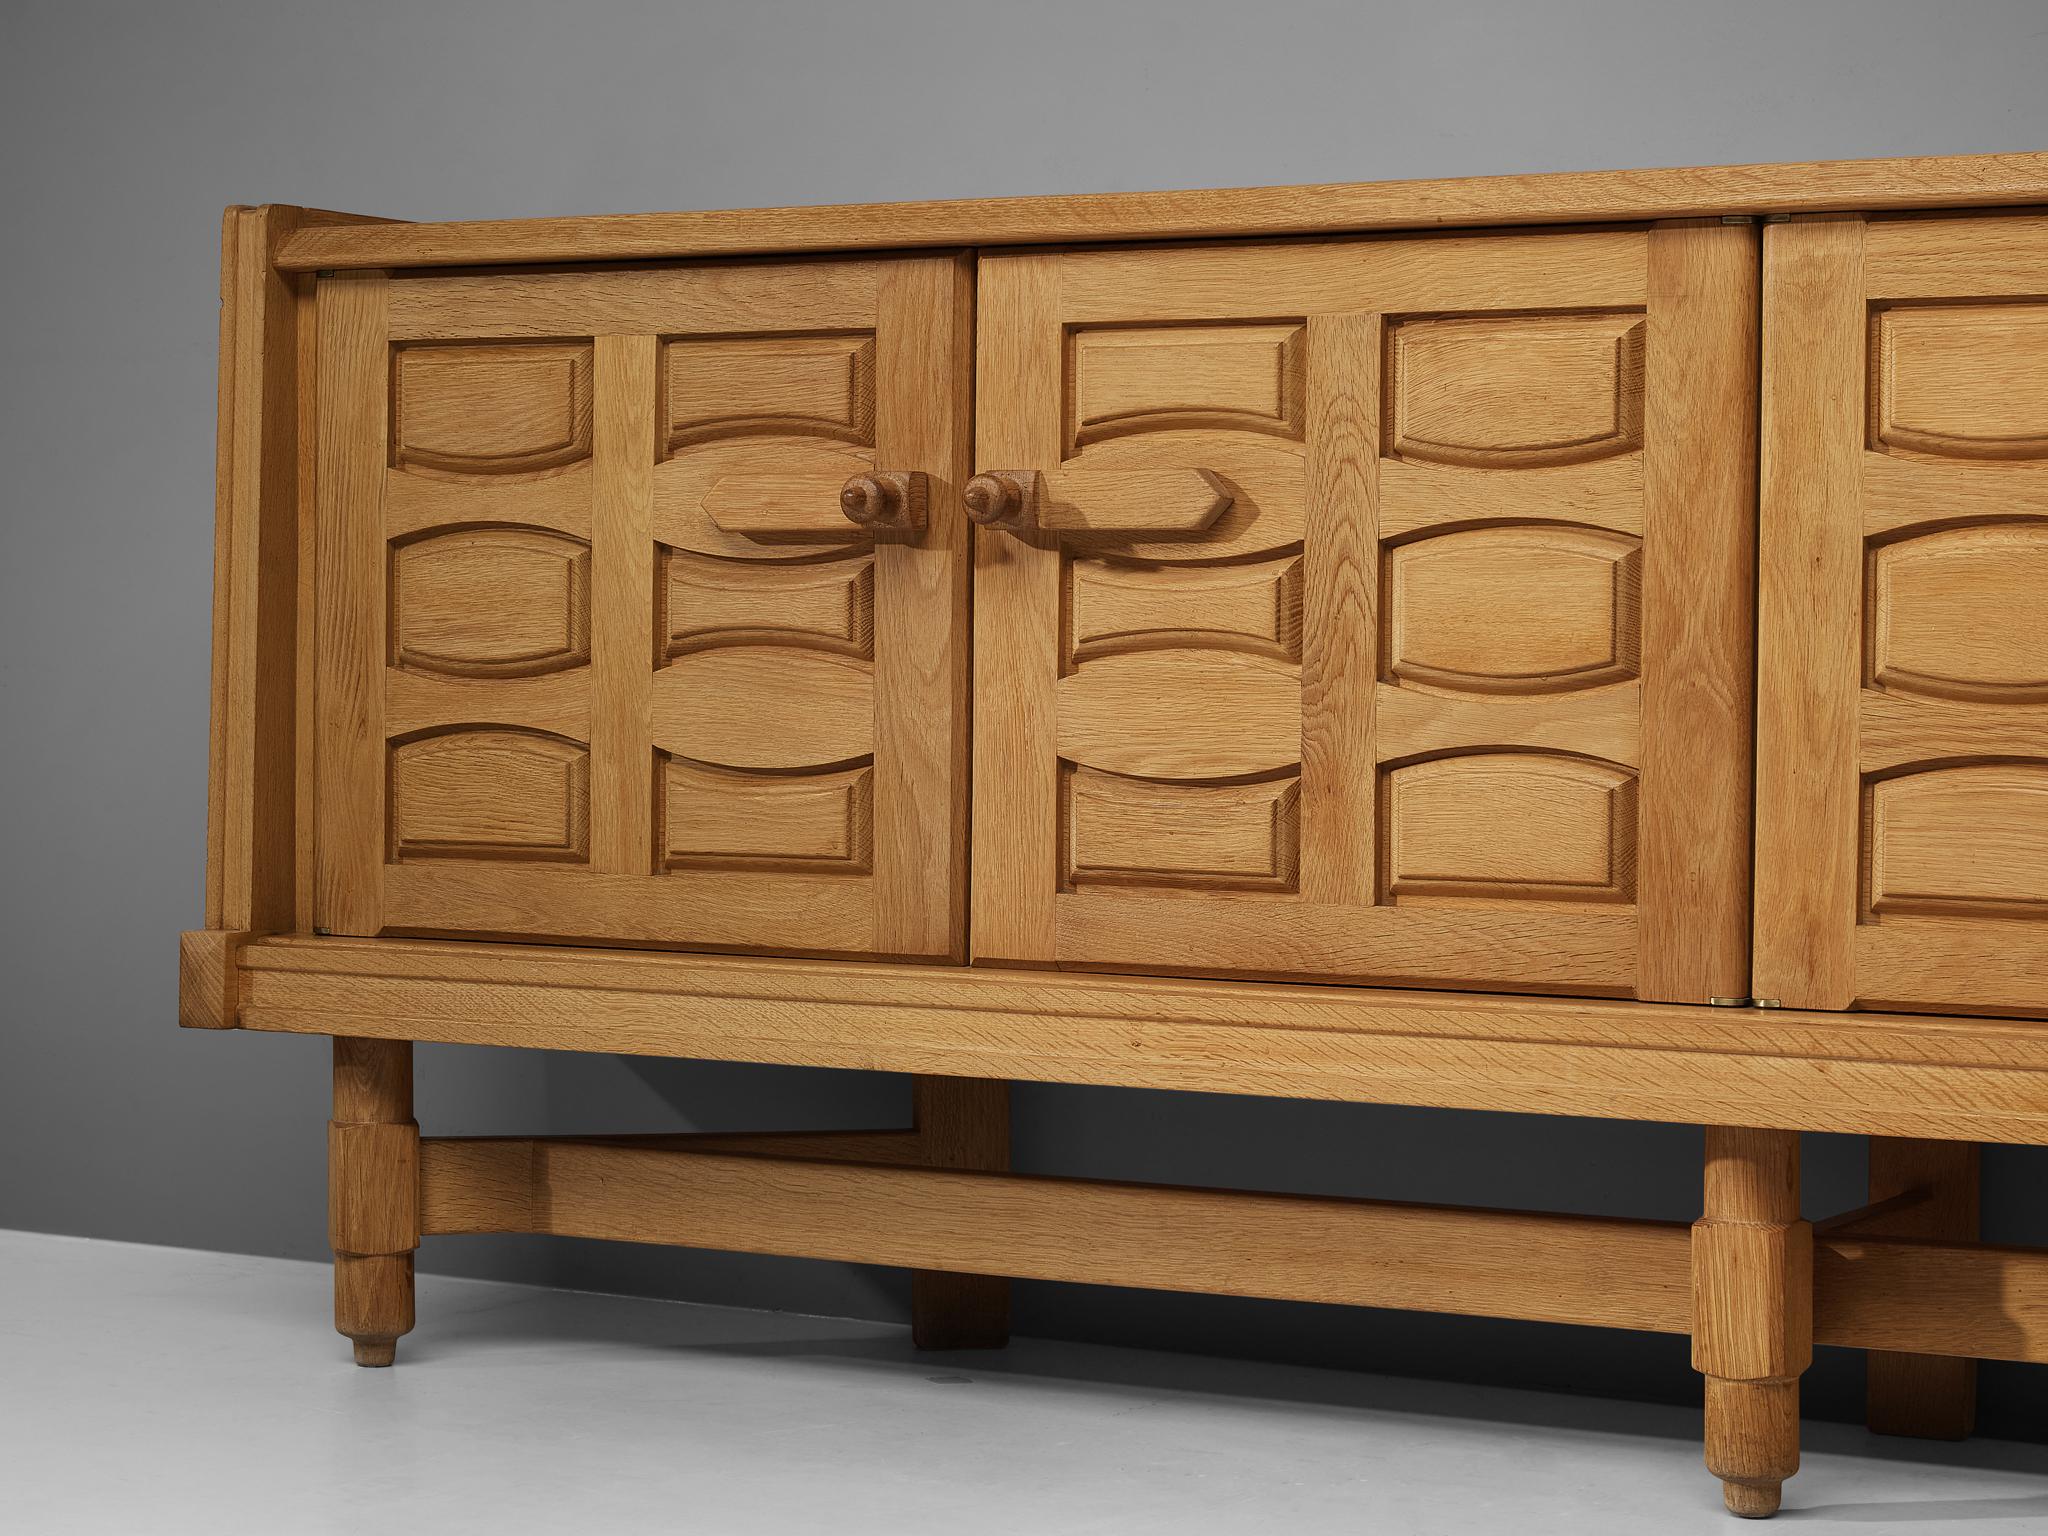 Guillerme & Chambron Sideboard in Solid Oak with Ceramic Tiles 1